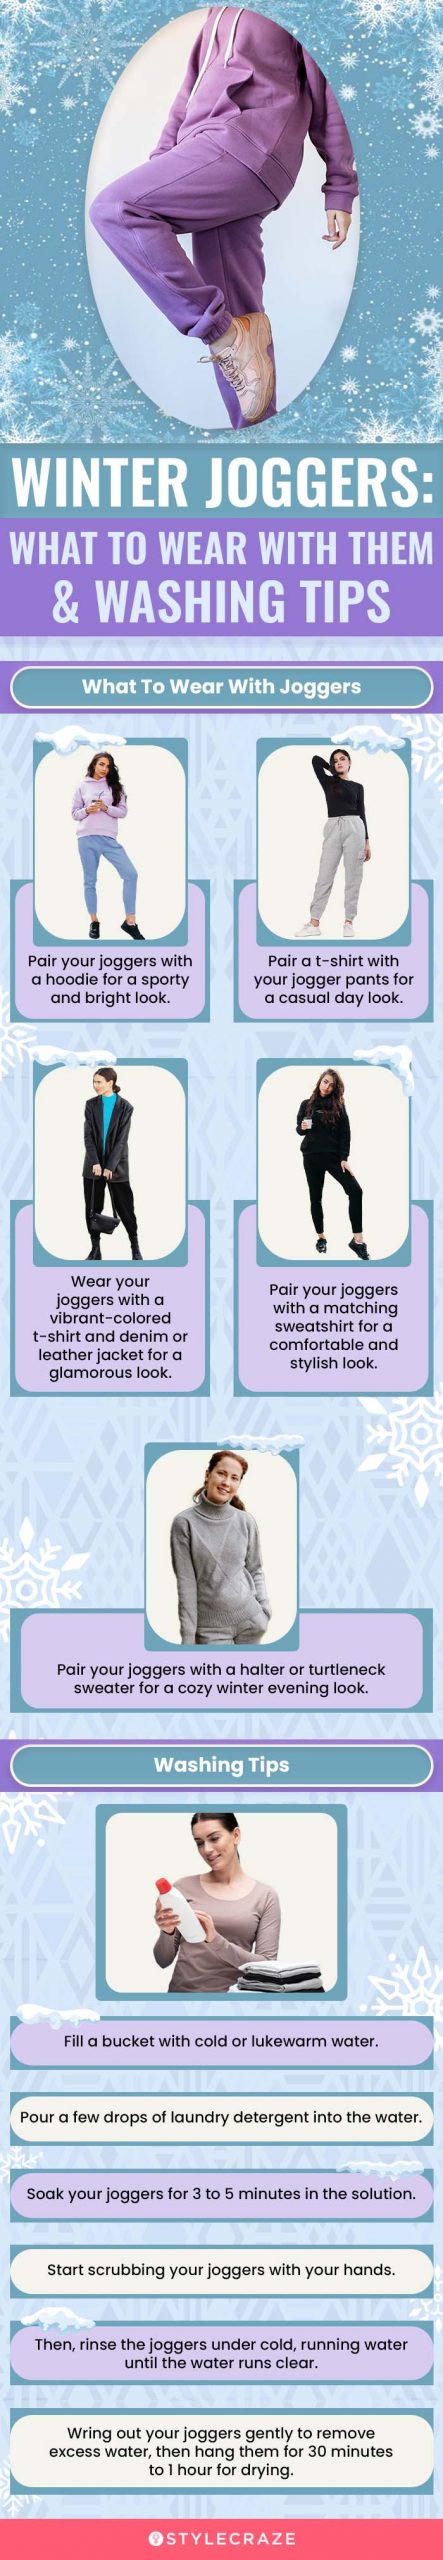 Winter Joggers: What To Wear With & Washing Tips (infographic)